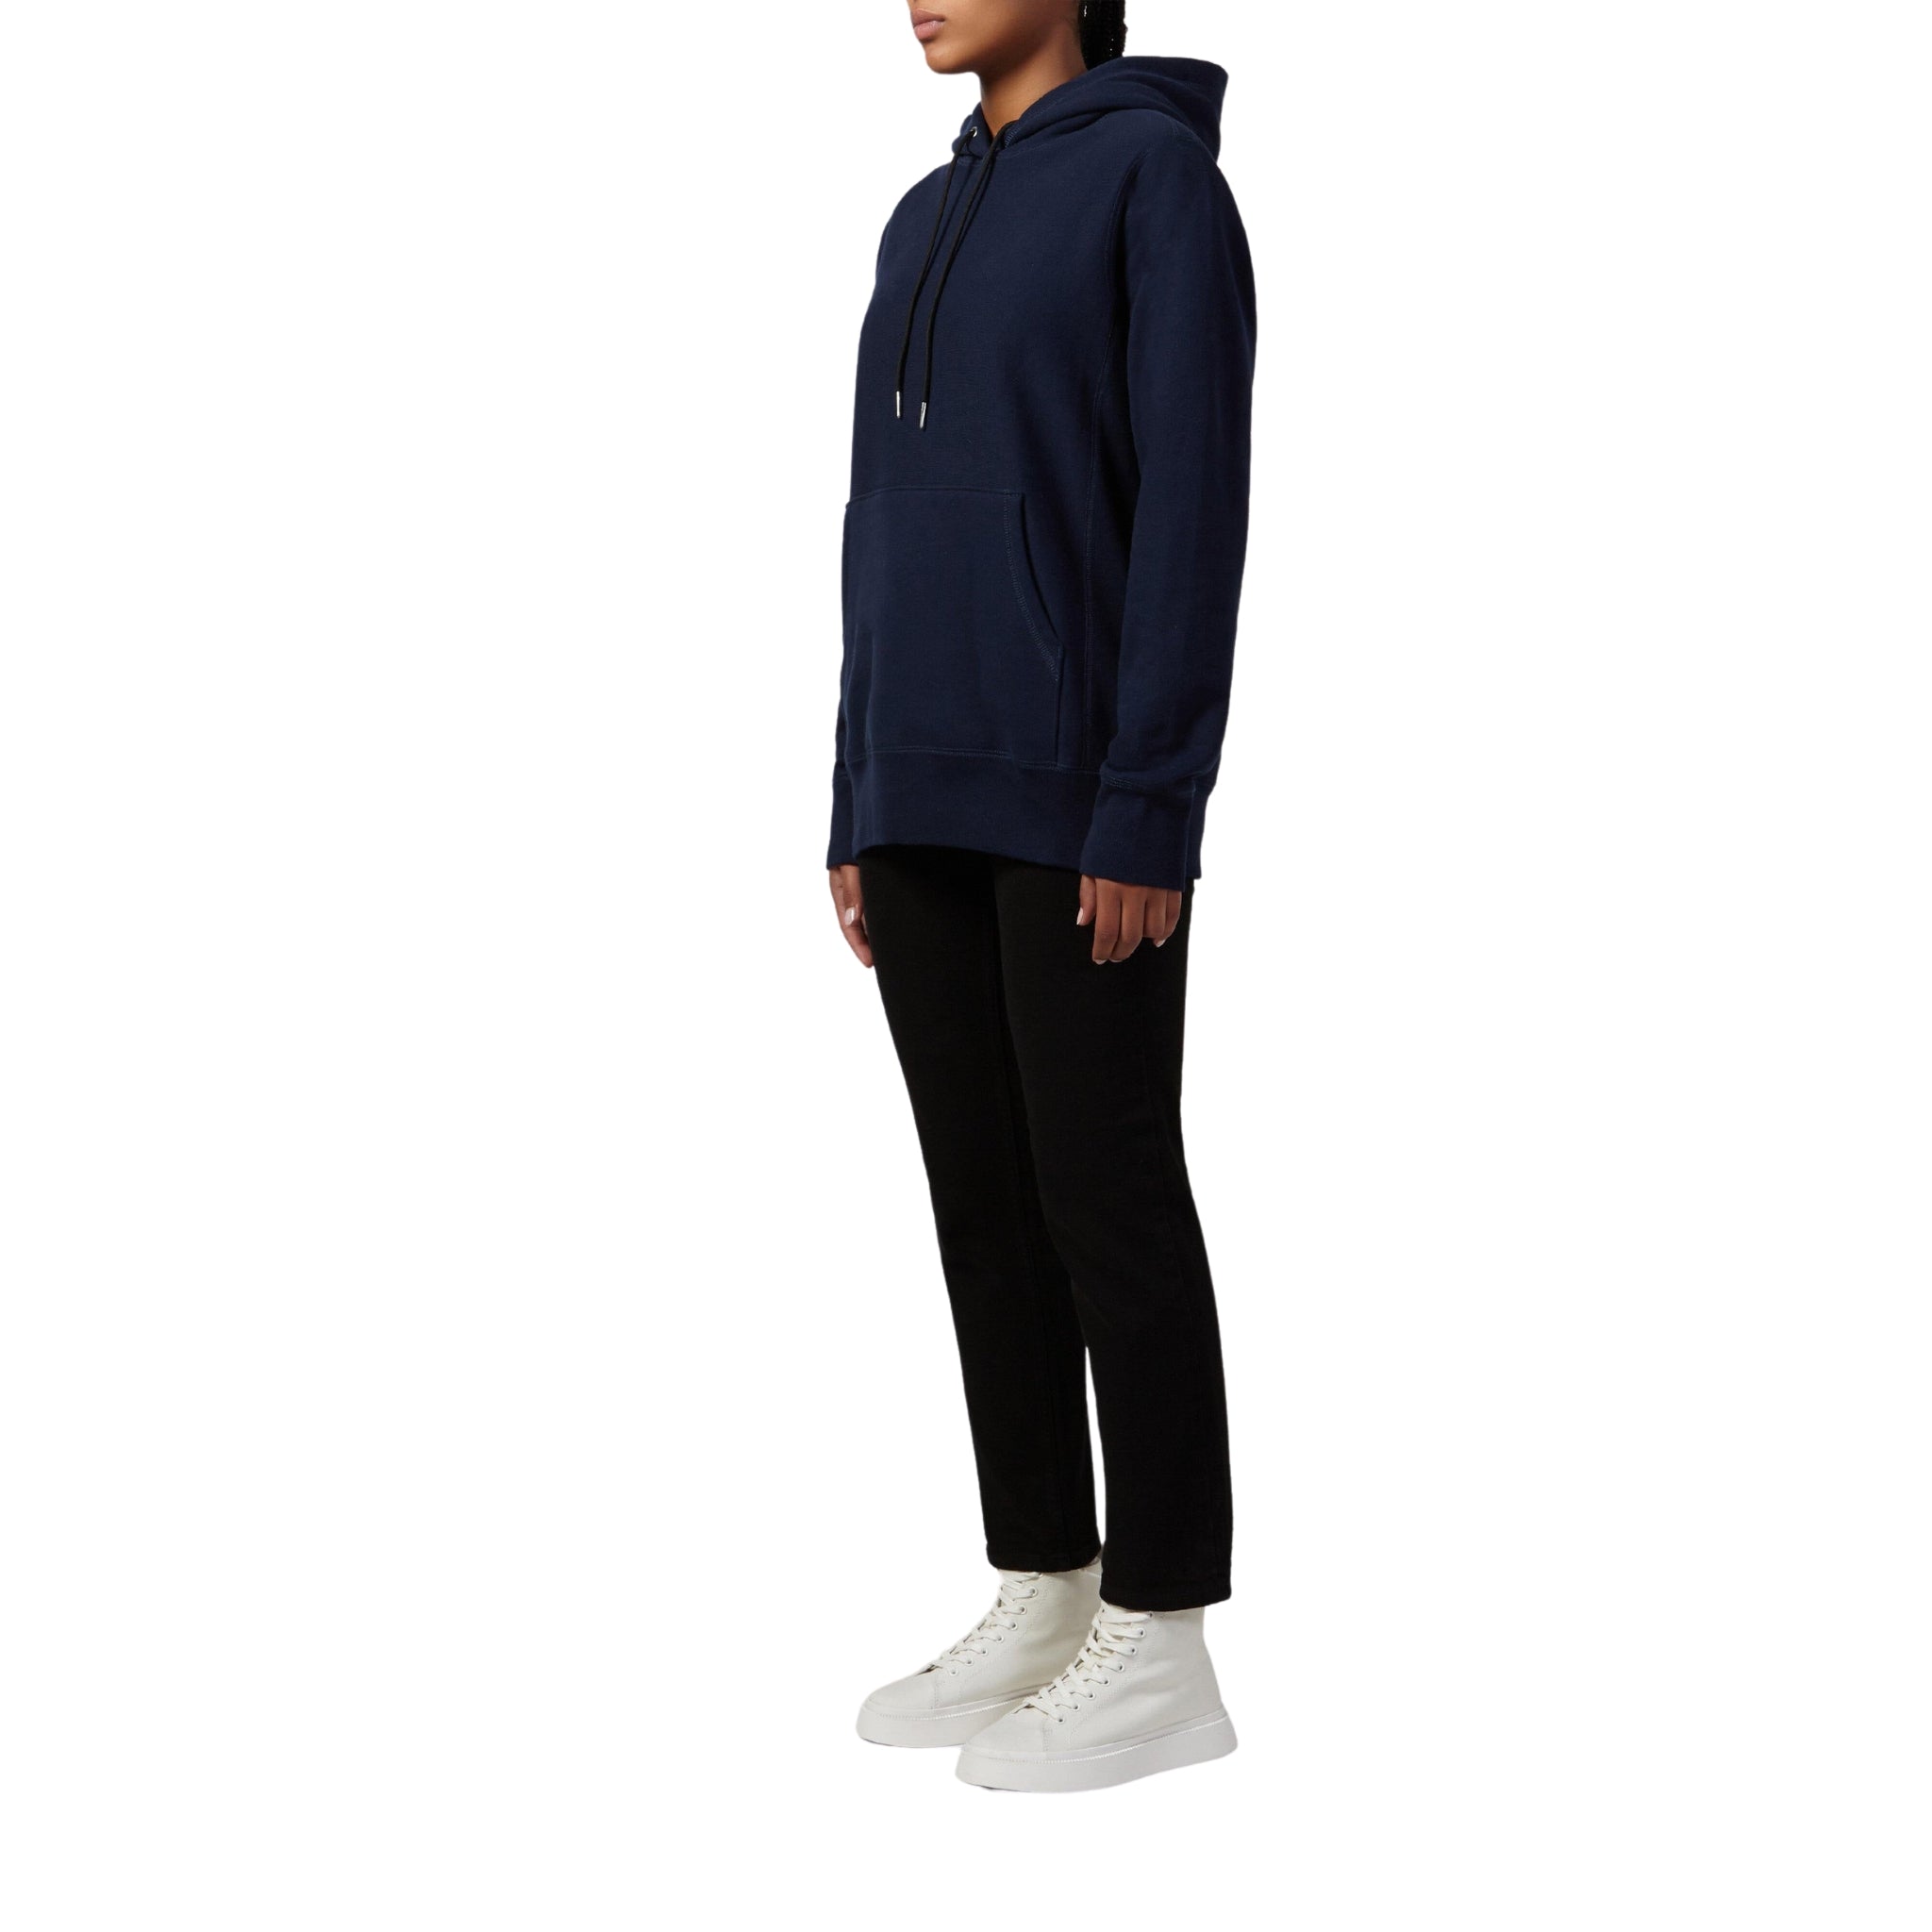 female side view of a Bedi' "second life" program navy hoodie against a white background